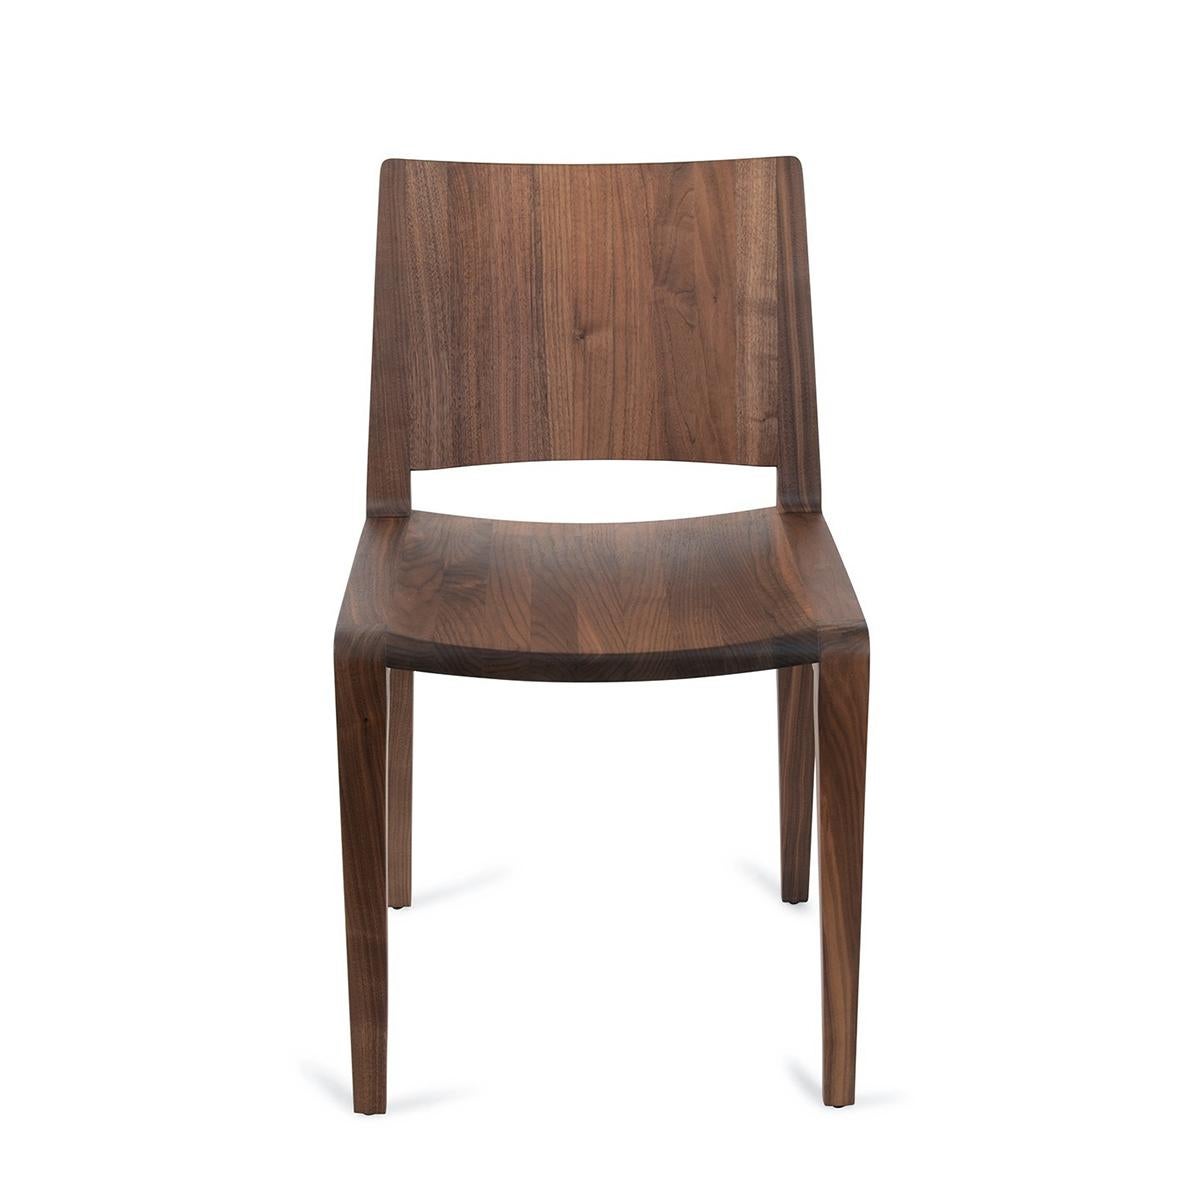 Hand-Crafted Refined Full Chair For Sale